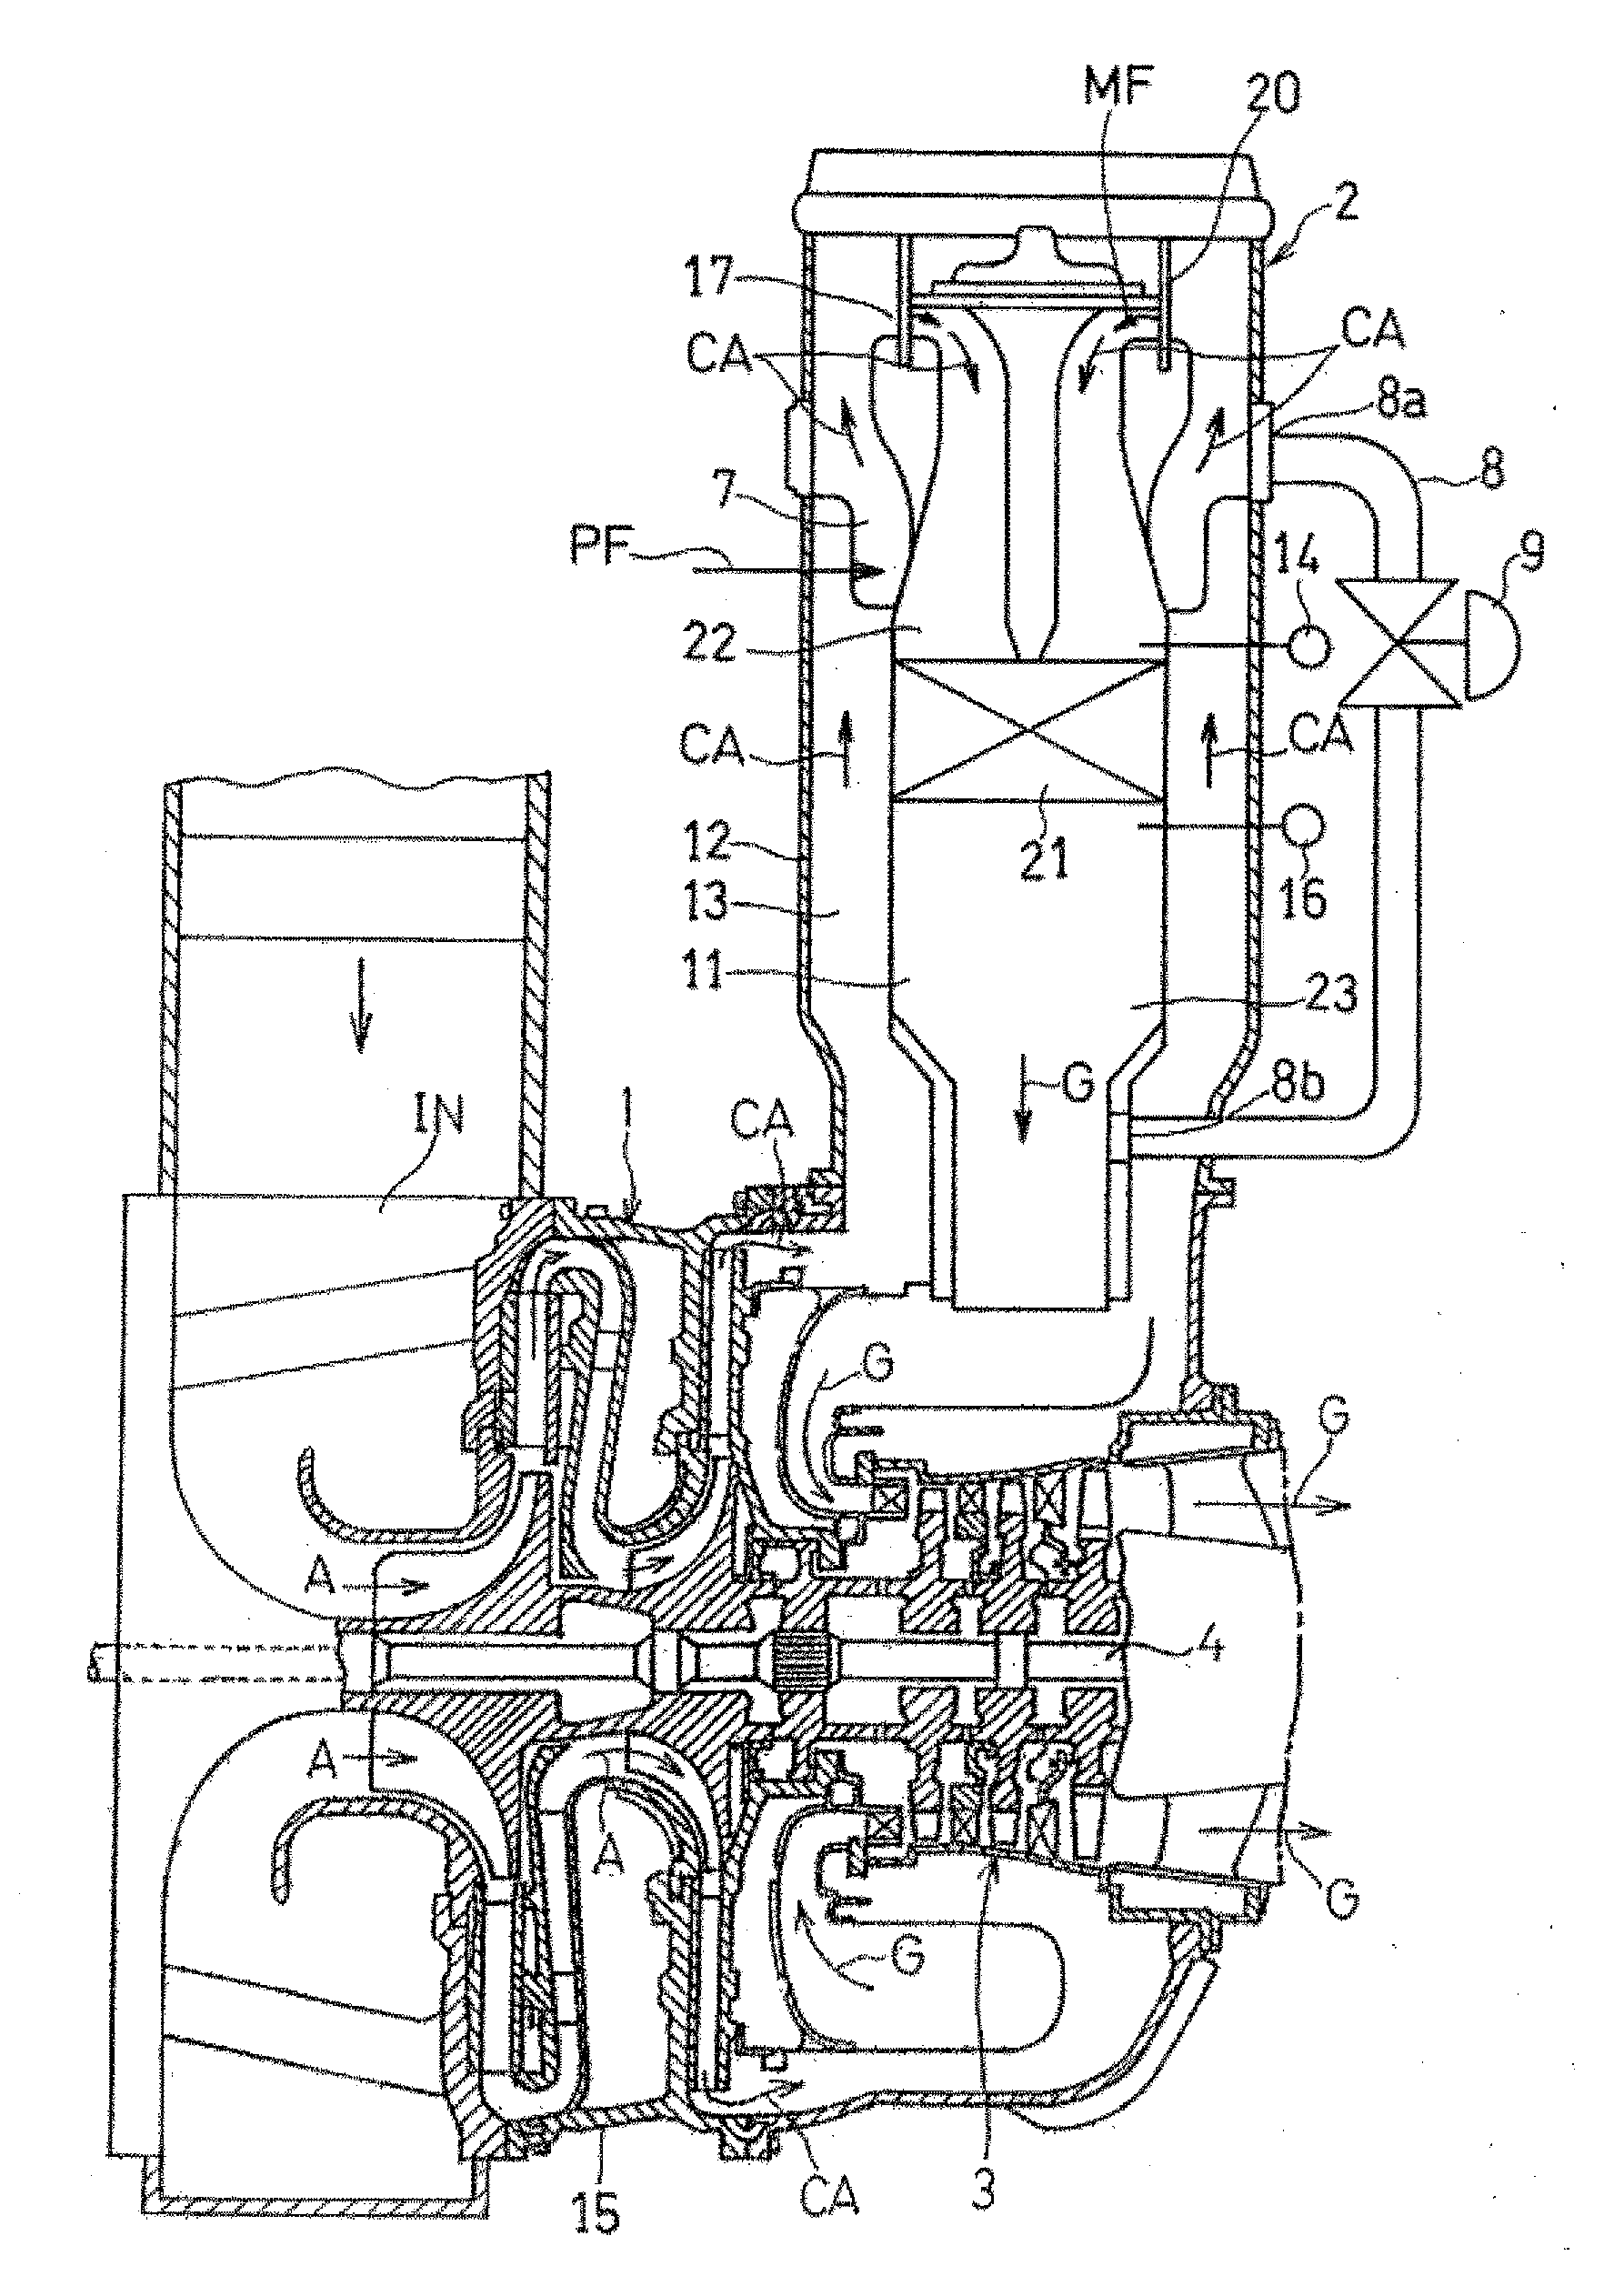 Controller for use with gas turbine engine